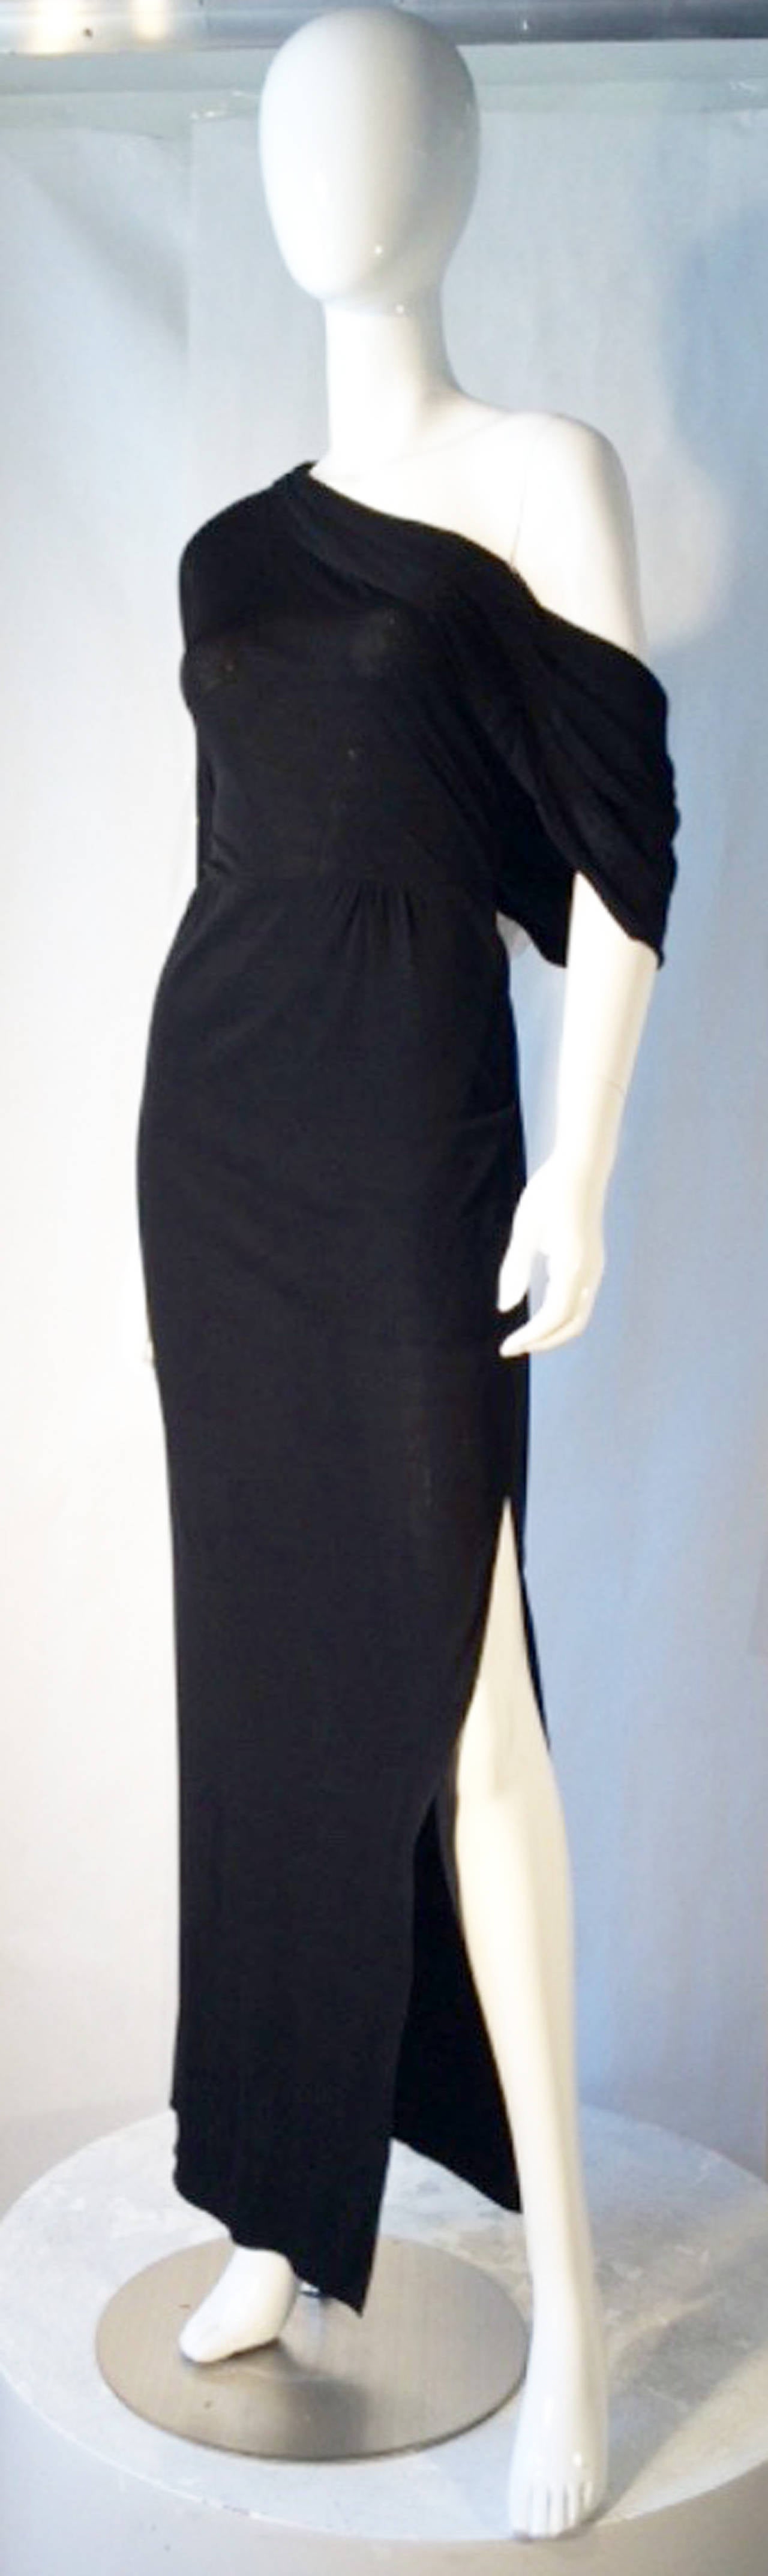 A exquisite vintage John Anthony couture jersey evening gown. Seductive  one-off item features a single arm sleeve and draping over opposite open shoulder. Nipped waist item with a full off center front leg vent and back zipper. Pristine appears